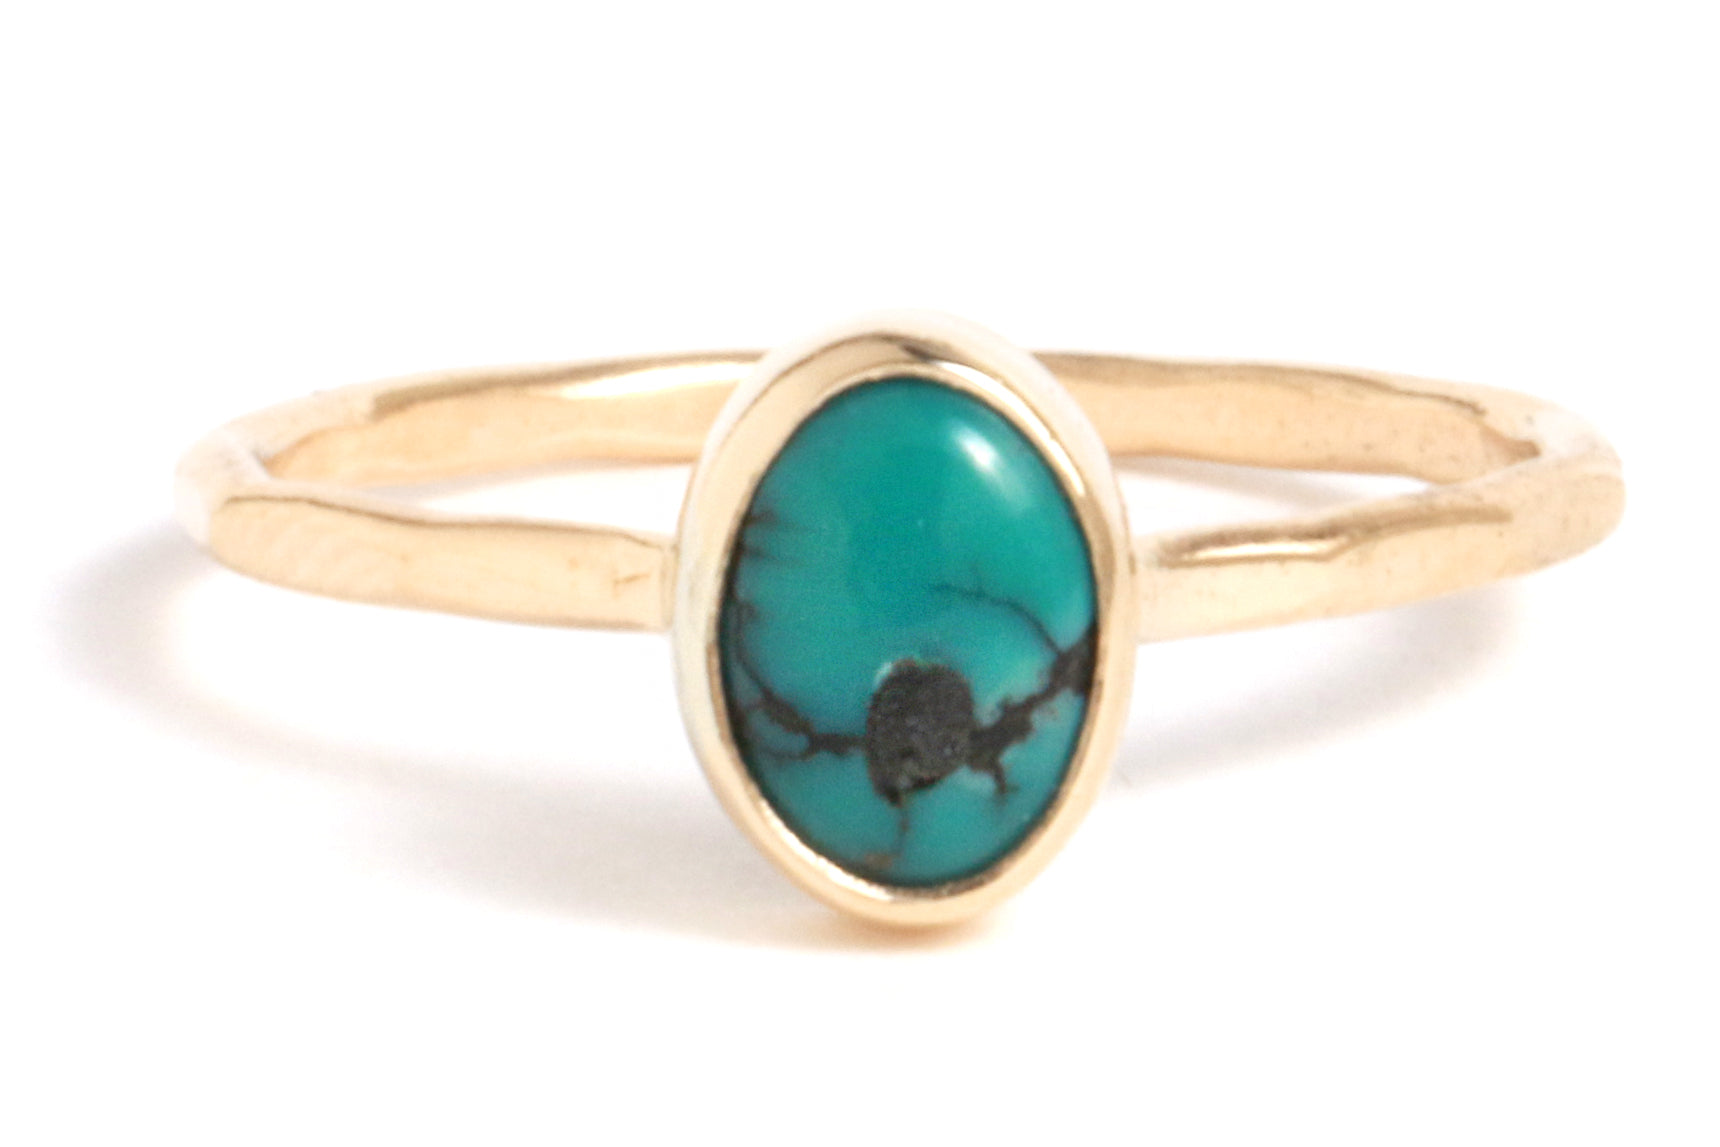 Small Oval Turquoise Ring - Melissa Joy Manning Jewelry